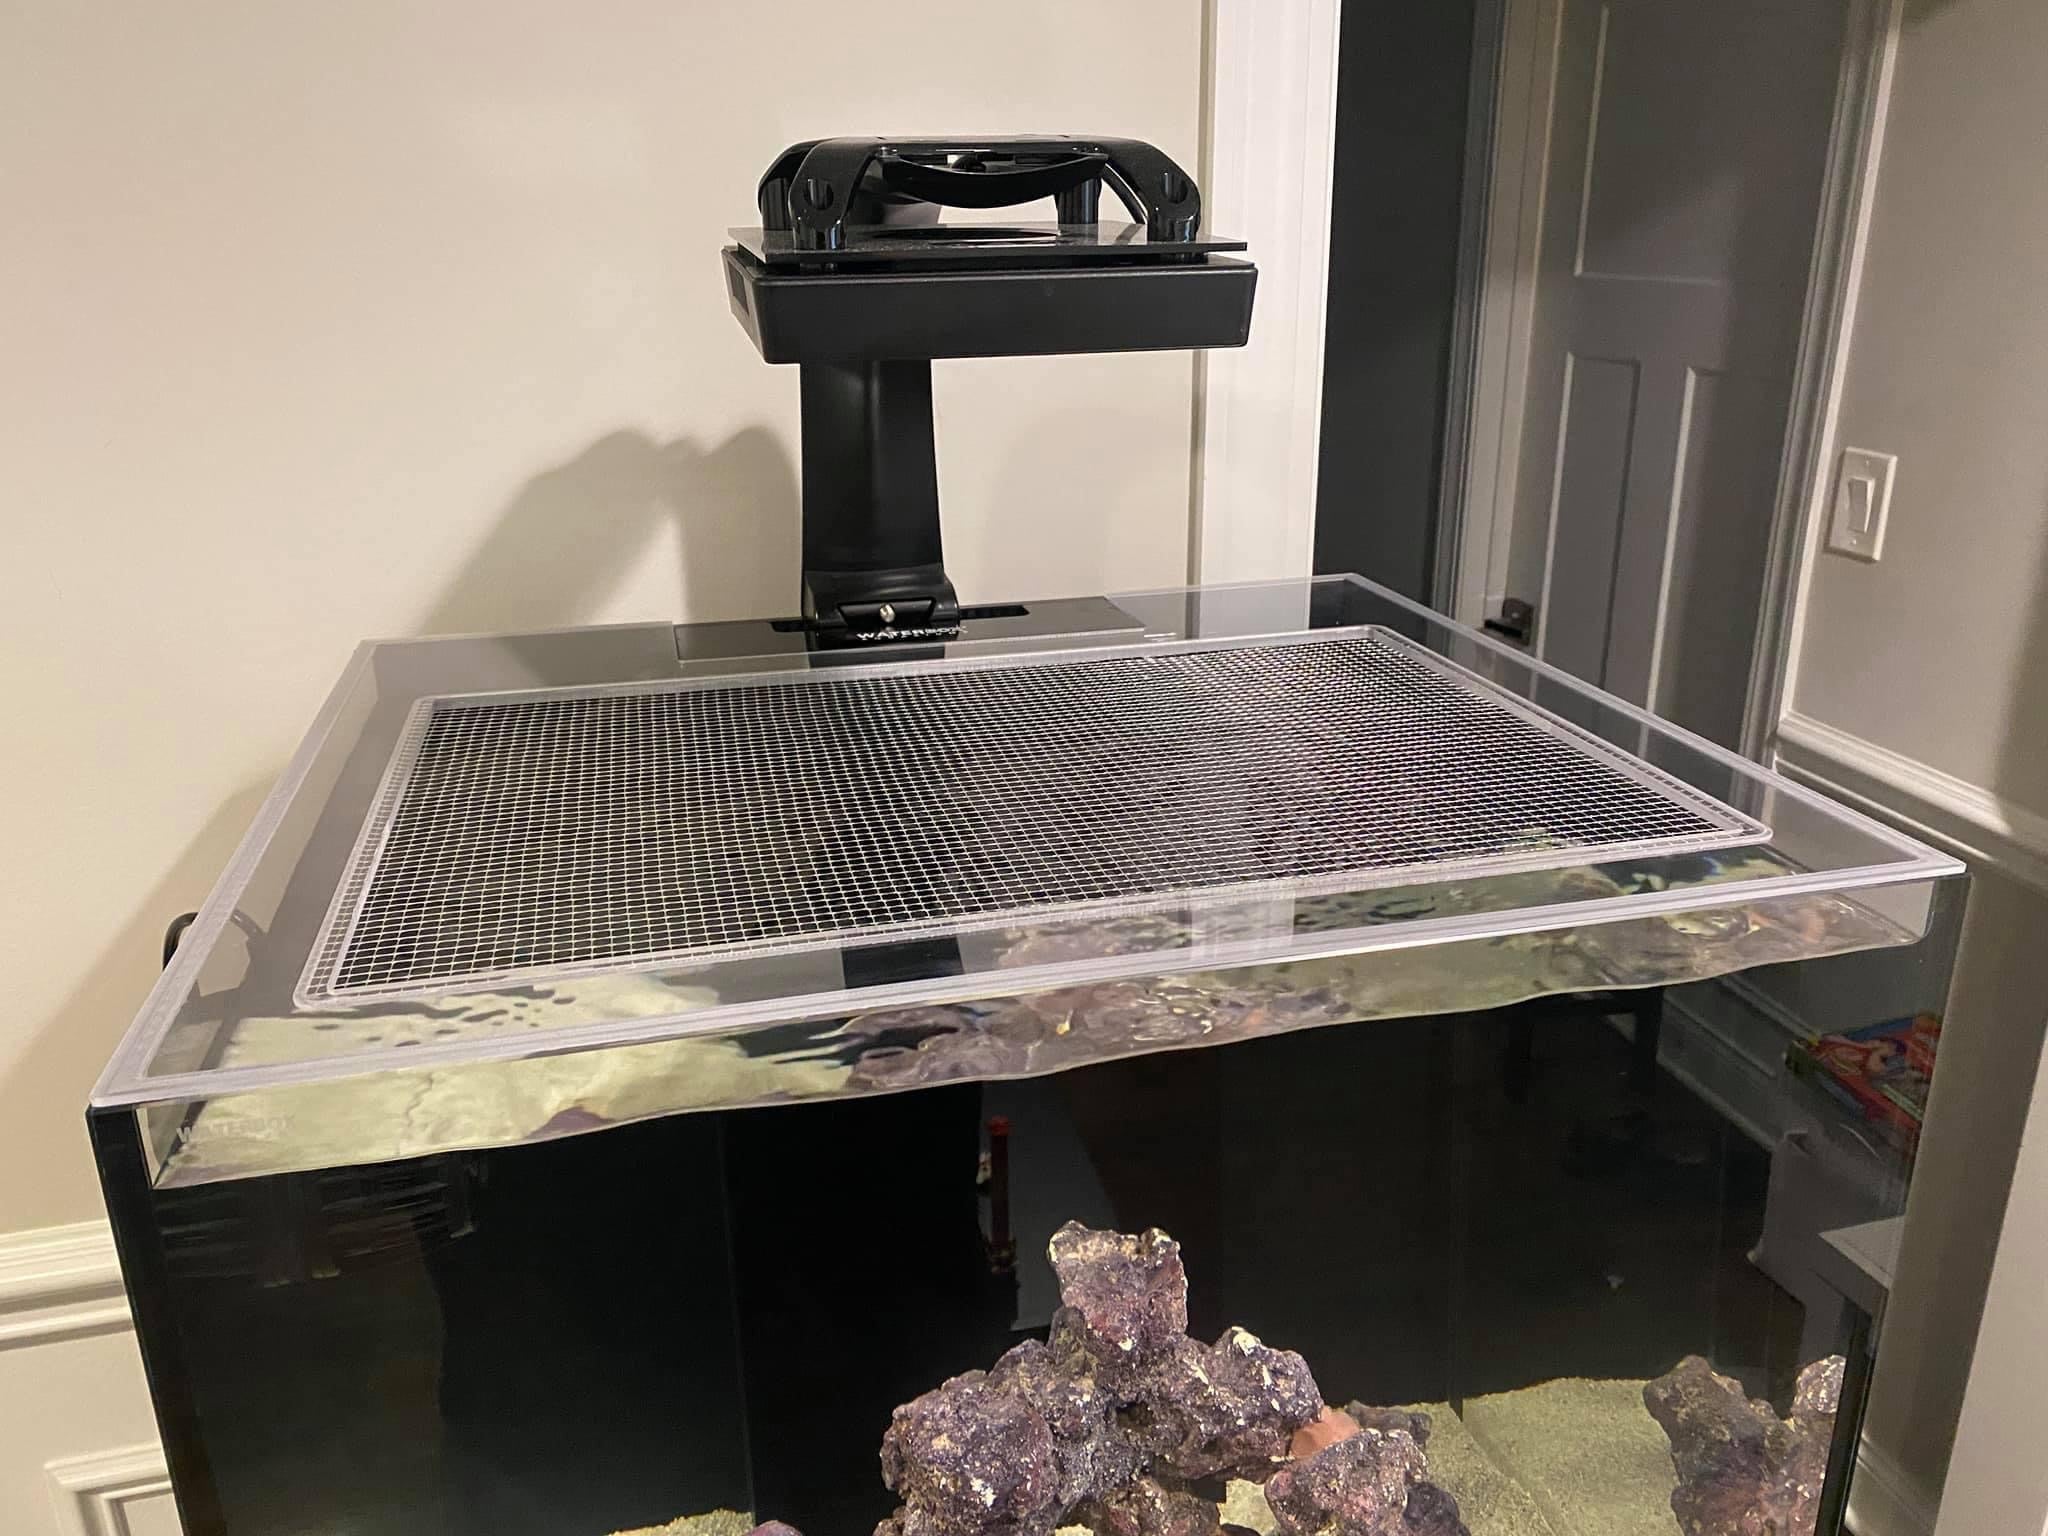 Ultum Nature Systems (UNS) Reef System R90 Lid